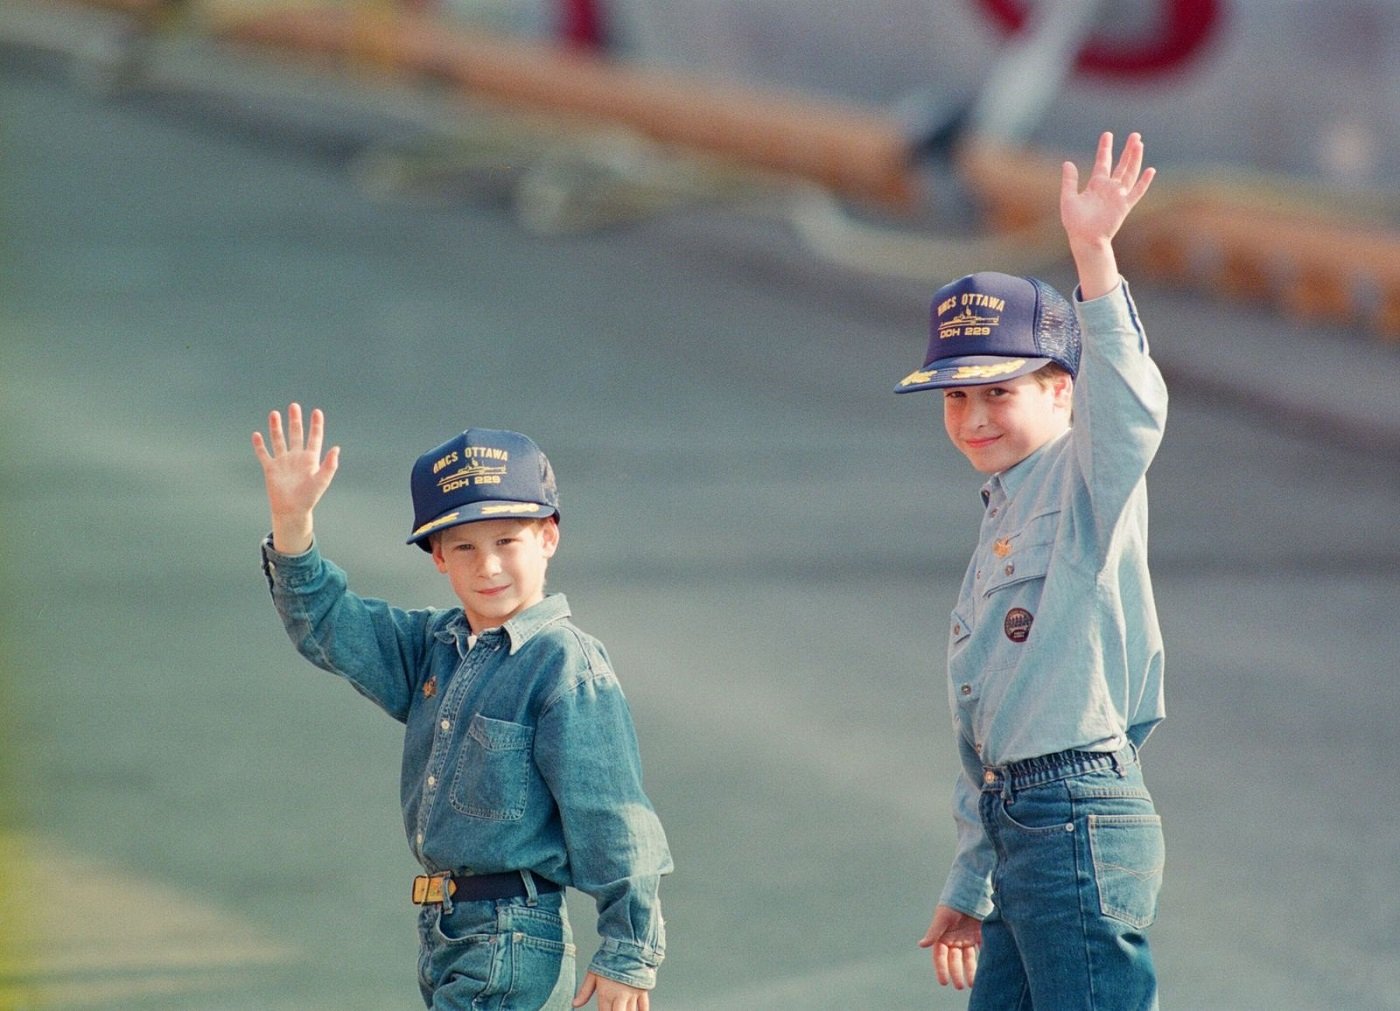 Prince Harry and Prince William during their tour of Canada on October 23, 1991 | Photo: Kent Gavin/Mirrorpix/Getty Images